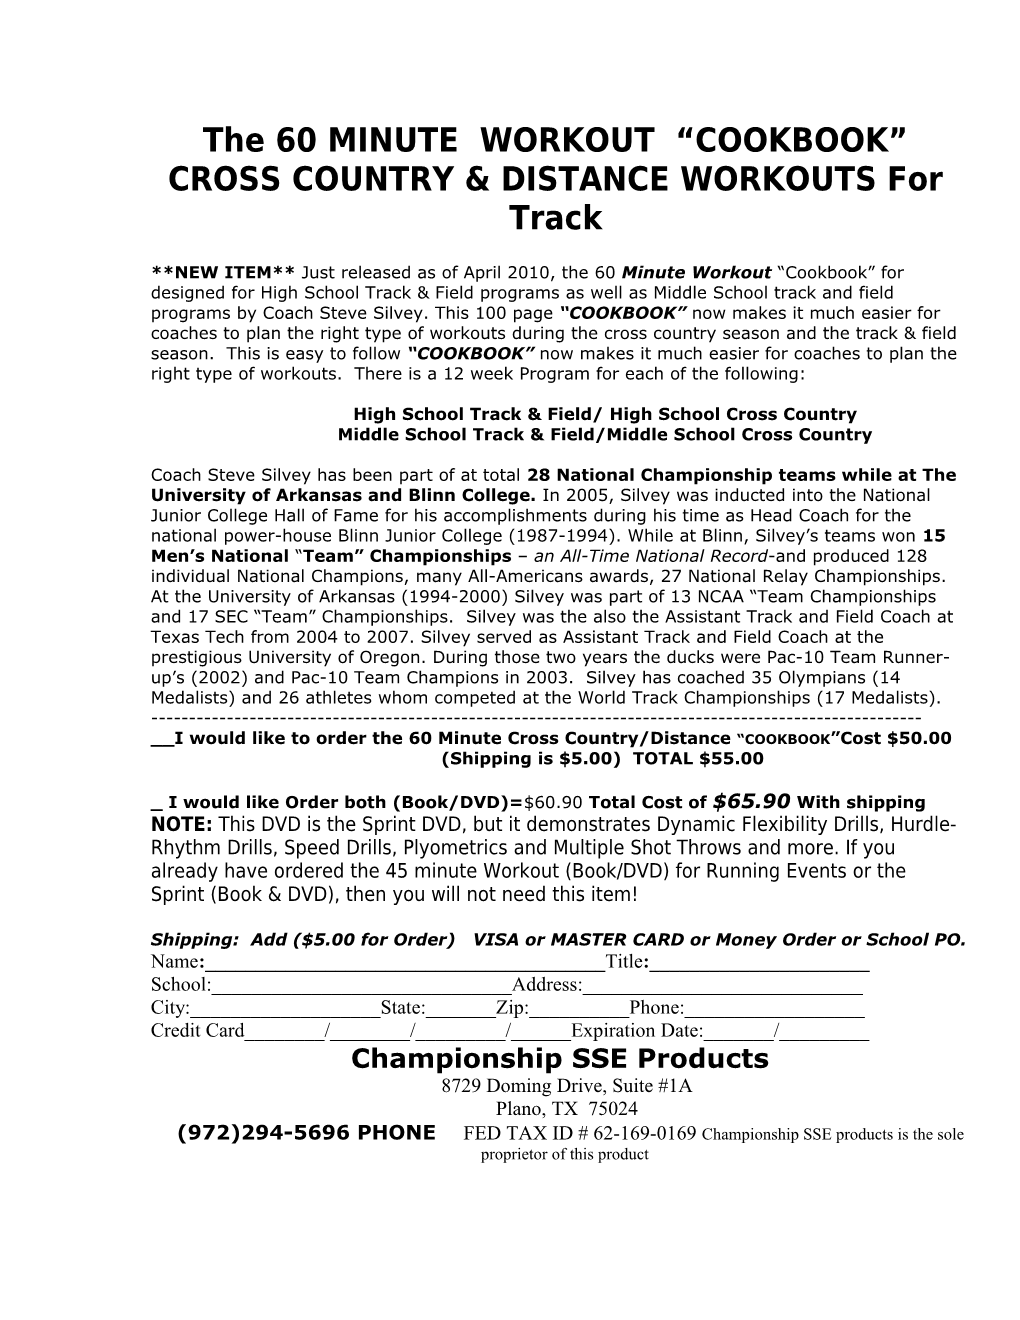 The 60 MINUTE WORKOUT - CROSS COUNTRY & DISTANCE WORKOUTS for Track & Field COOK BOOK